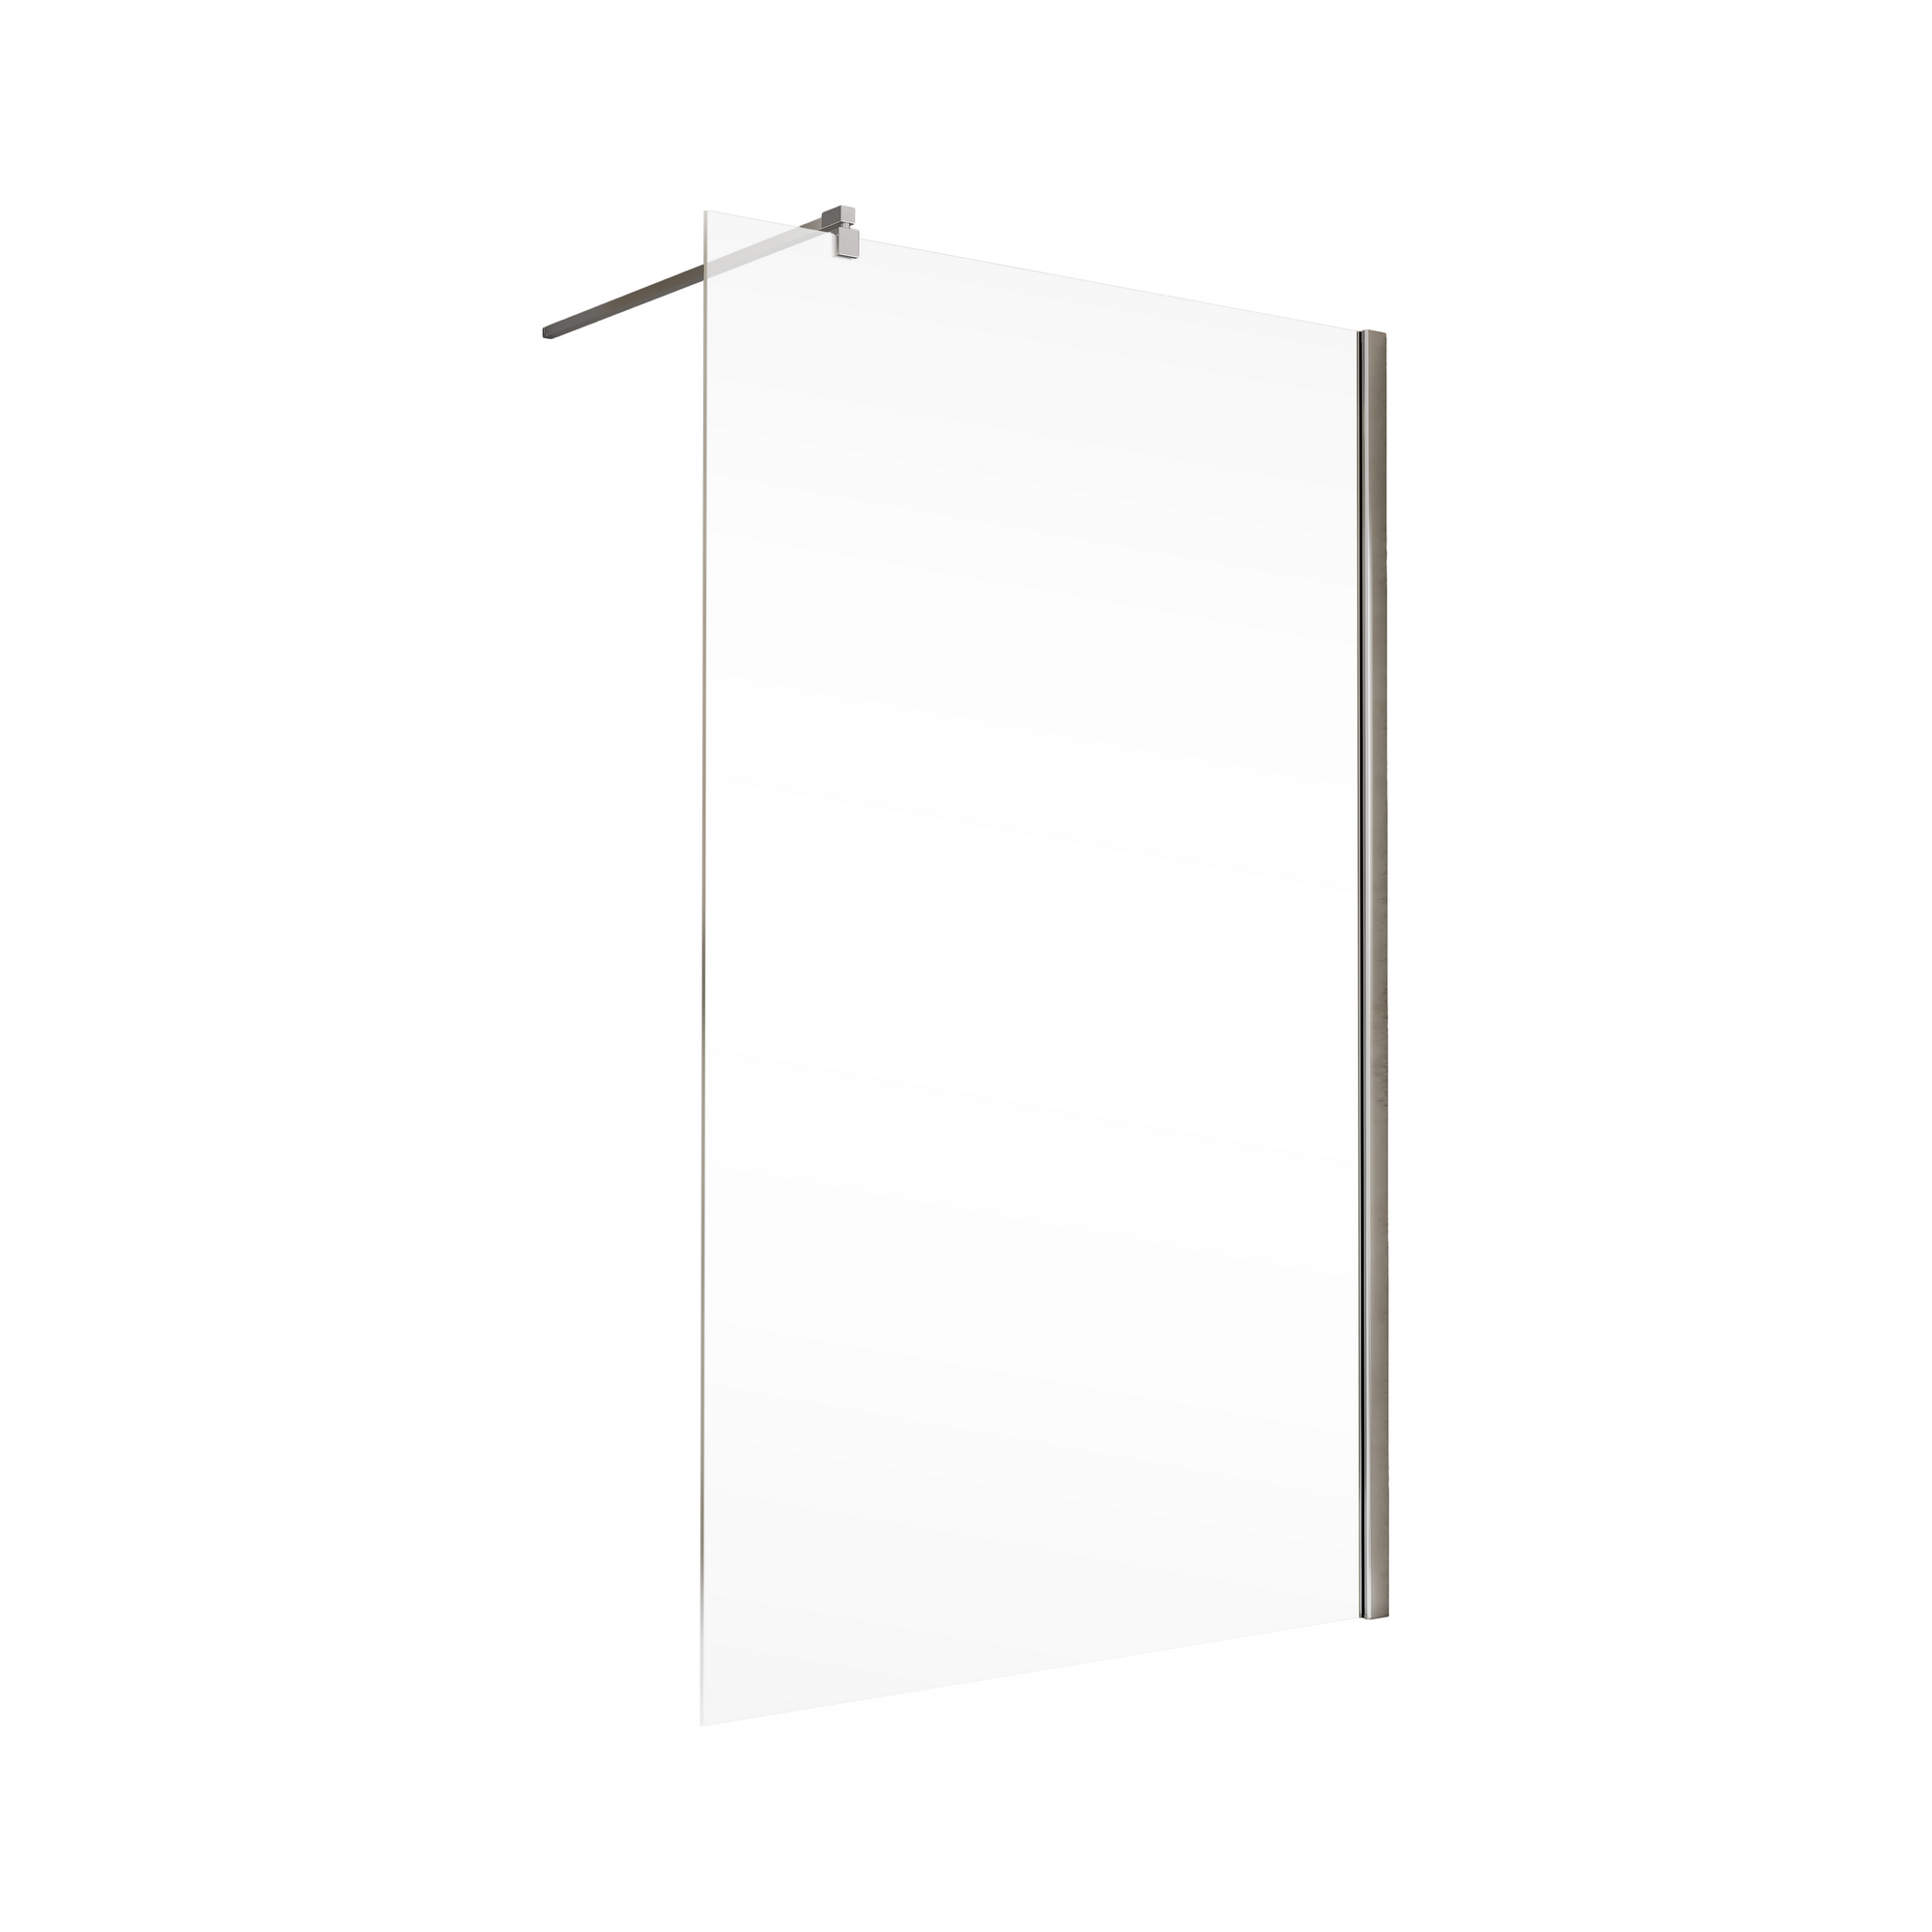 Duschwand 'Toura' Walk-In 120 cm + product picture